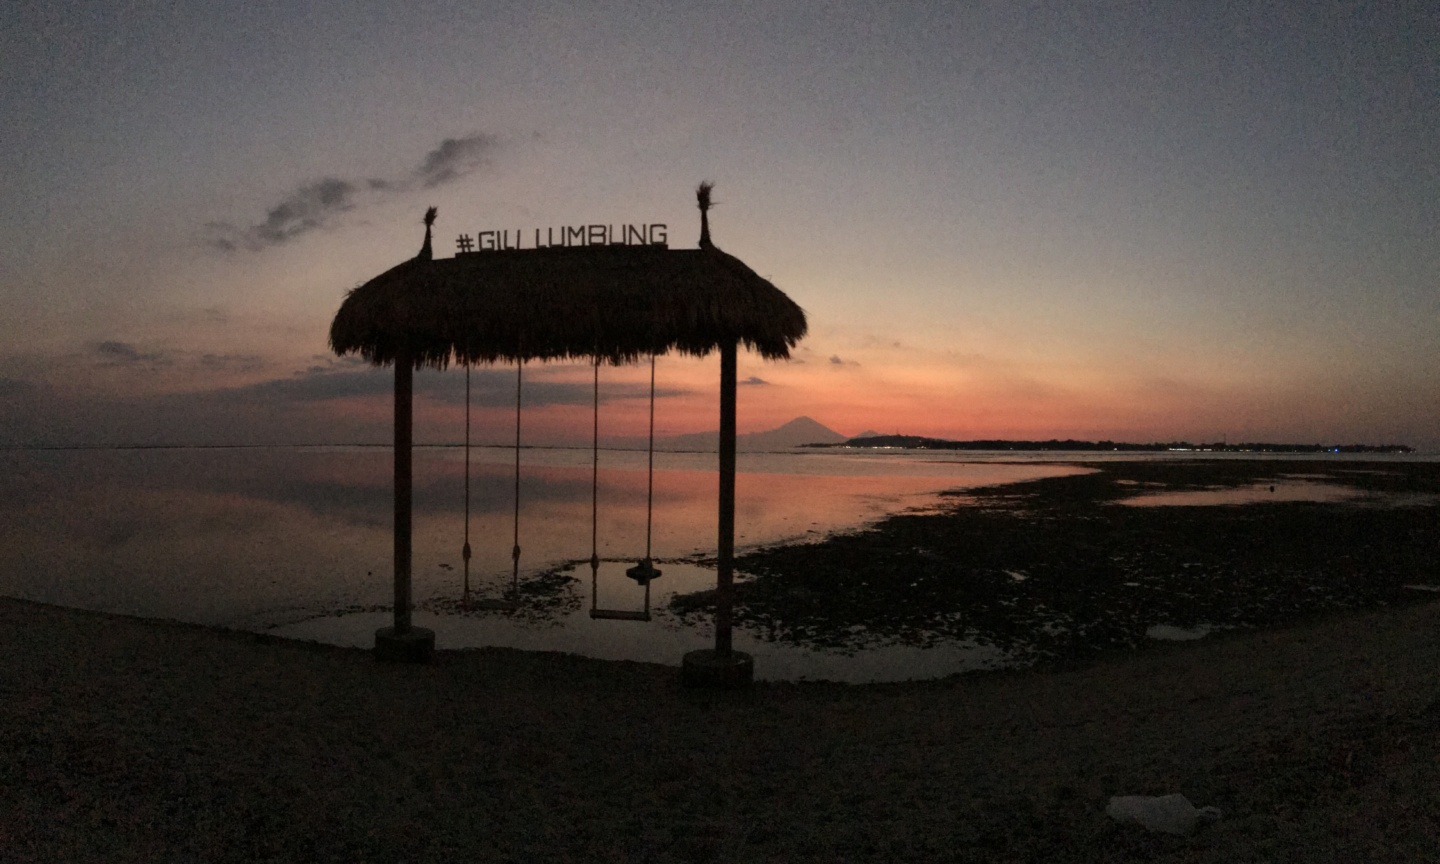 Bali | Four Days in the Gili Islands